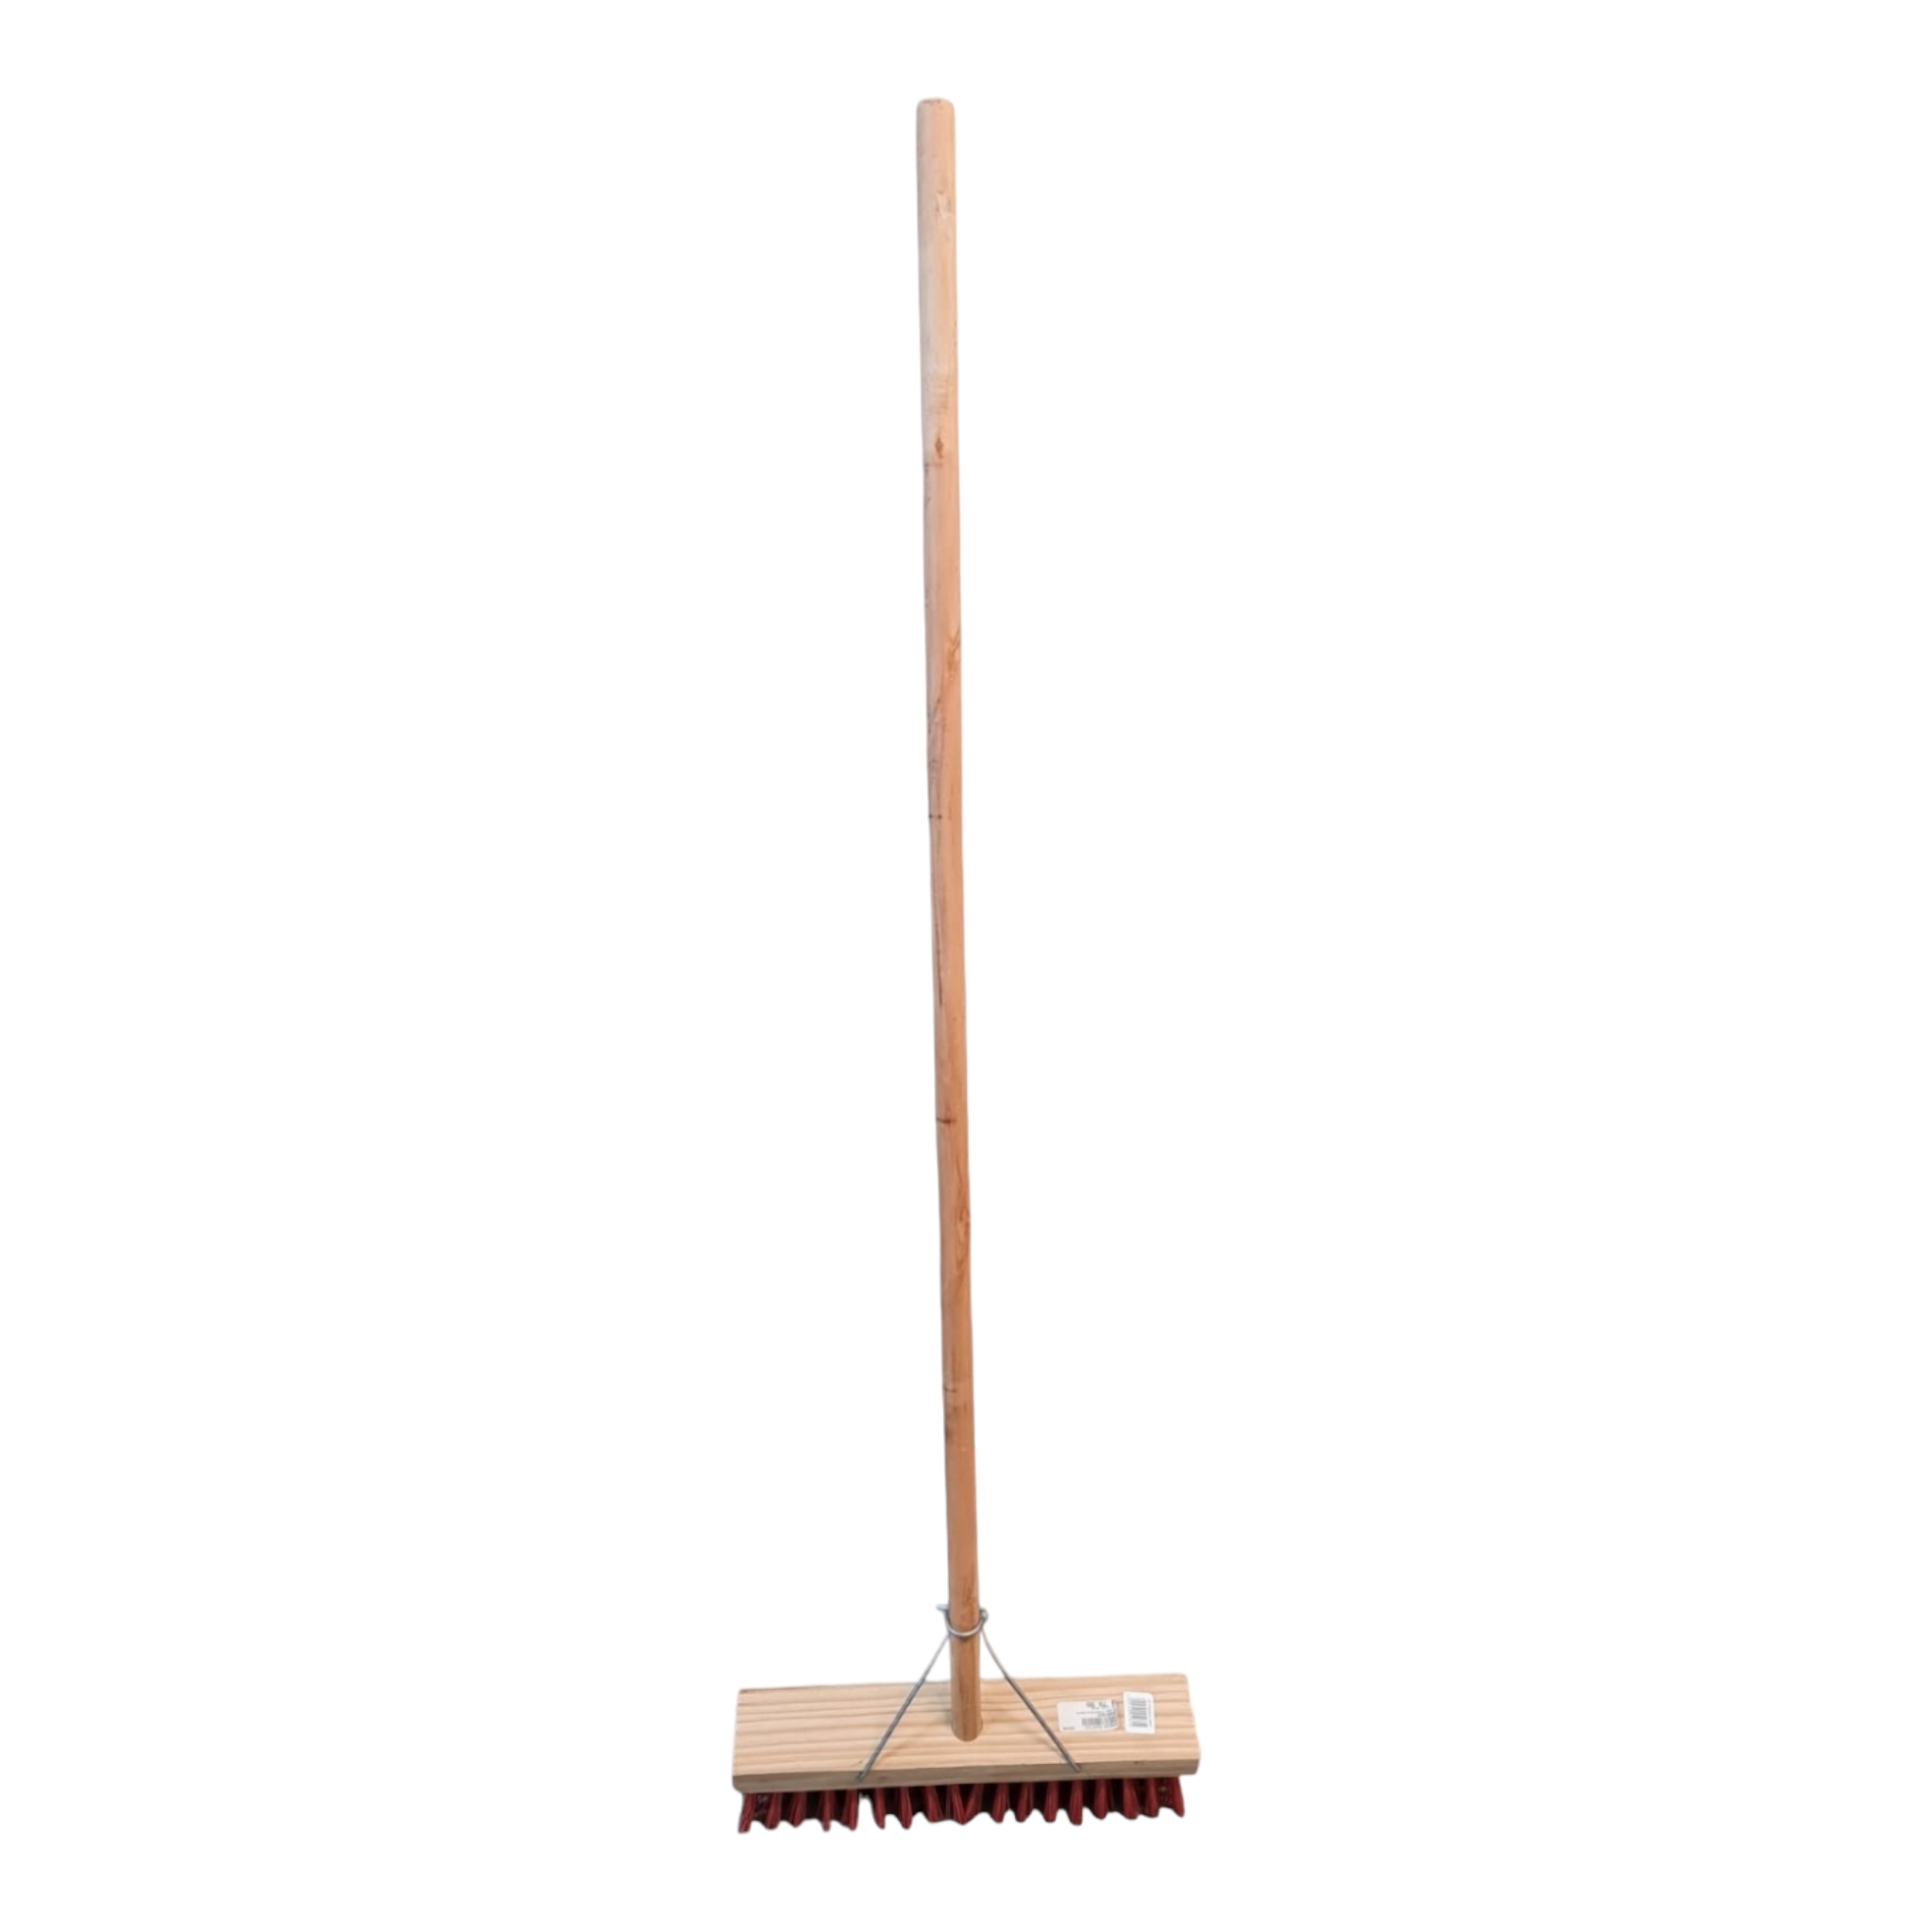 House Cleaning Broom Platform Hard 15 inch Buzz